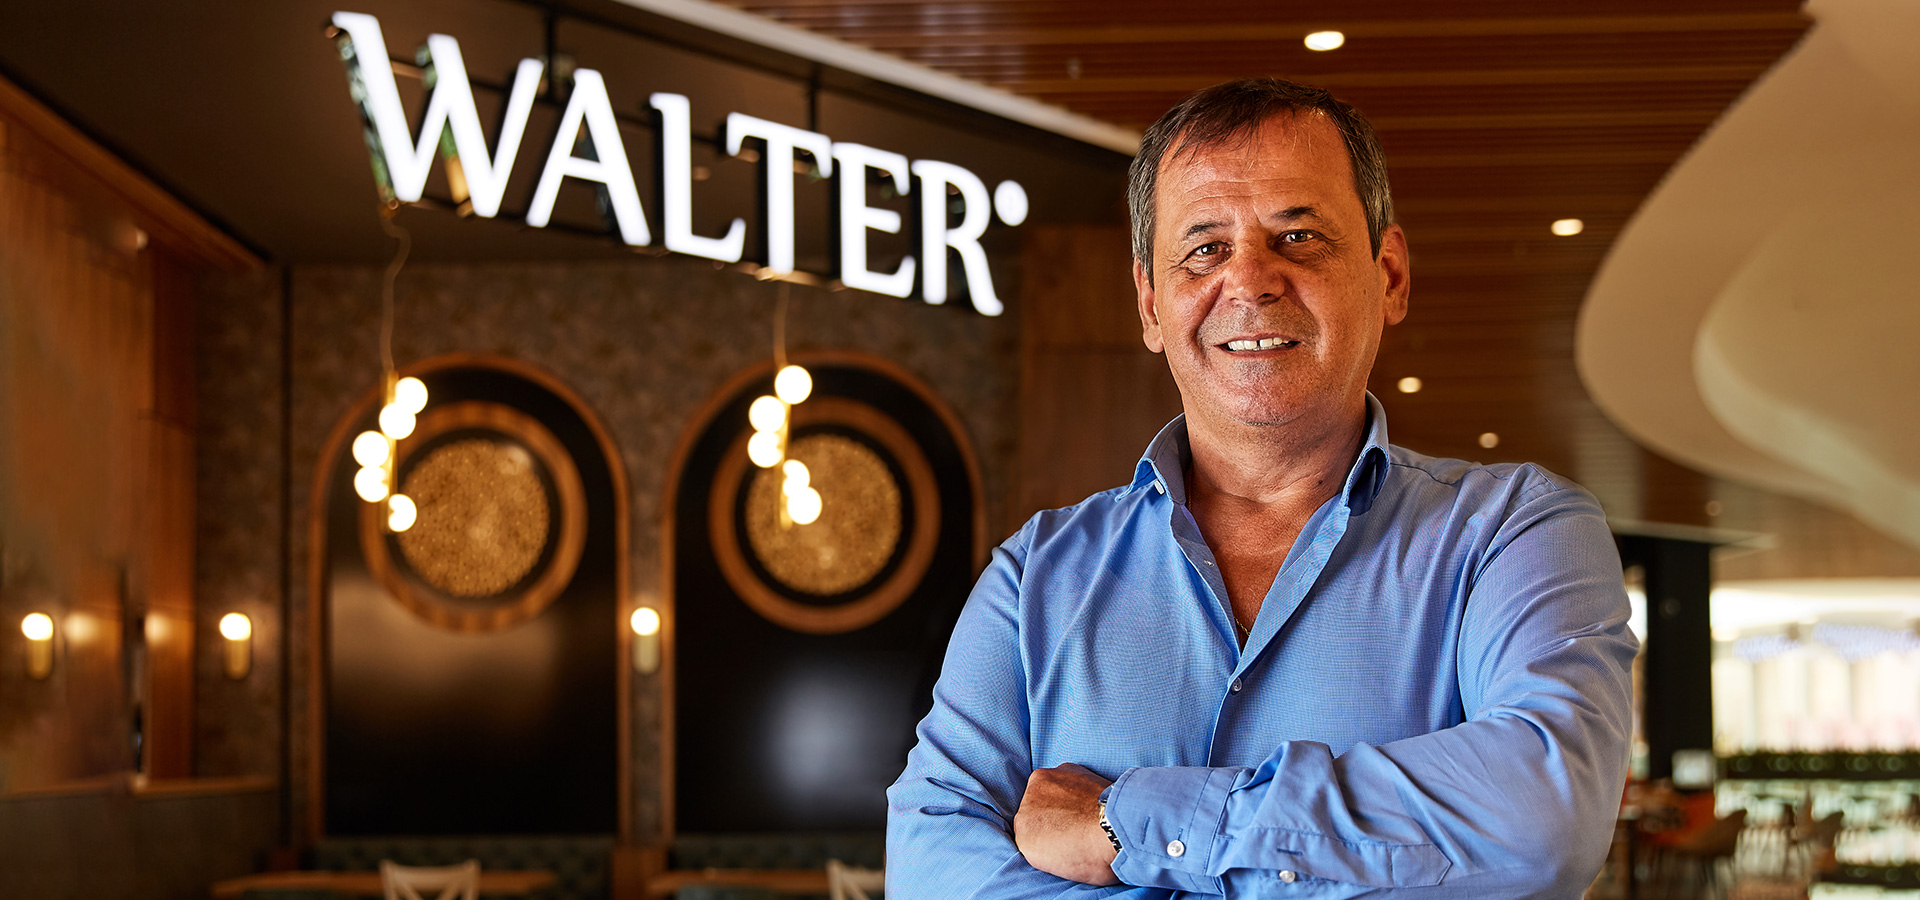 Walter: Cevaps that you eat with gusto